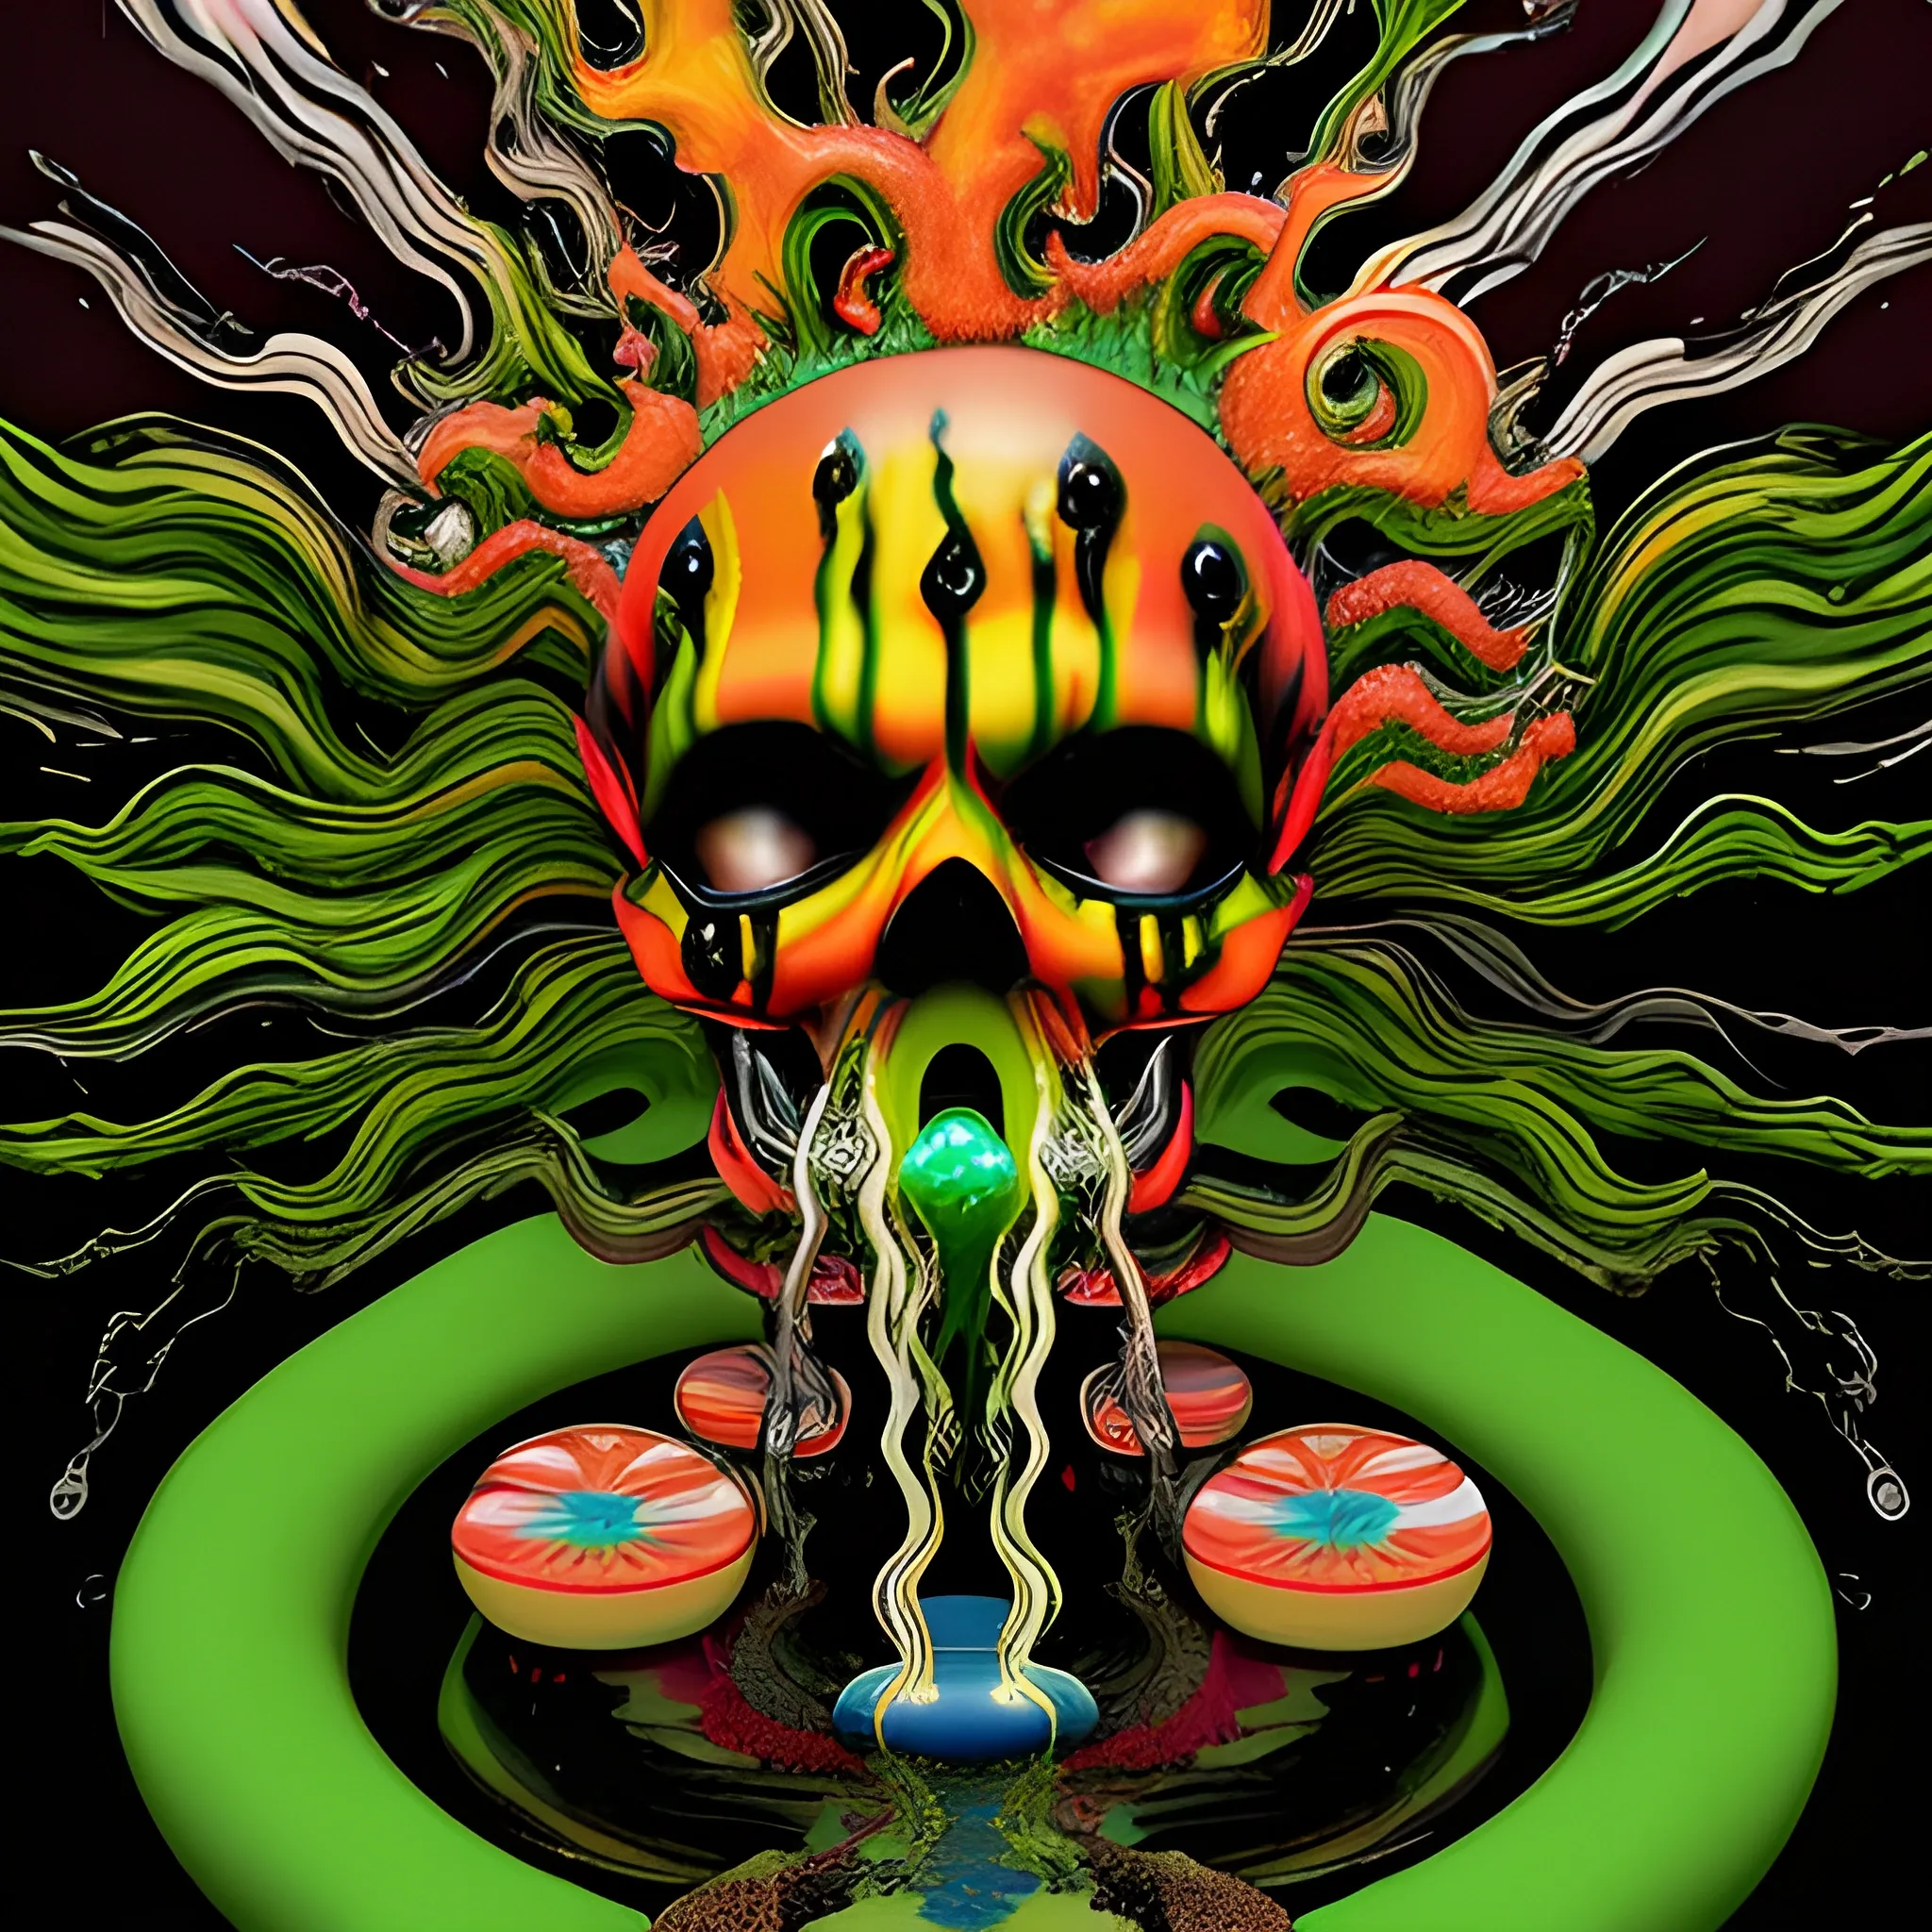 rfktrstyle A 4k death skull controlling and manipulating out of control fire and water, multicolor fire, freshy, surrounded by chibiStyle hooded-sugar-skulls, (yellow&red colored fire)(black&green colored water:1.5), tangled, elemental splash, detailed glowing demon eyes, Dynamic, vivid, creative, soft shadow, perfect anatomy, perfect hands, hyperdetailed artwork,tshirt design,  perfectly centred, neo-expressionist oil paint, centred, posing portrait by hajime sorayama, Trippy